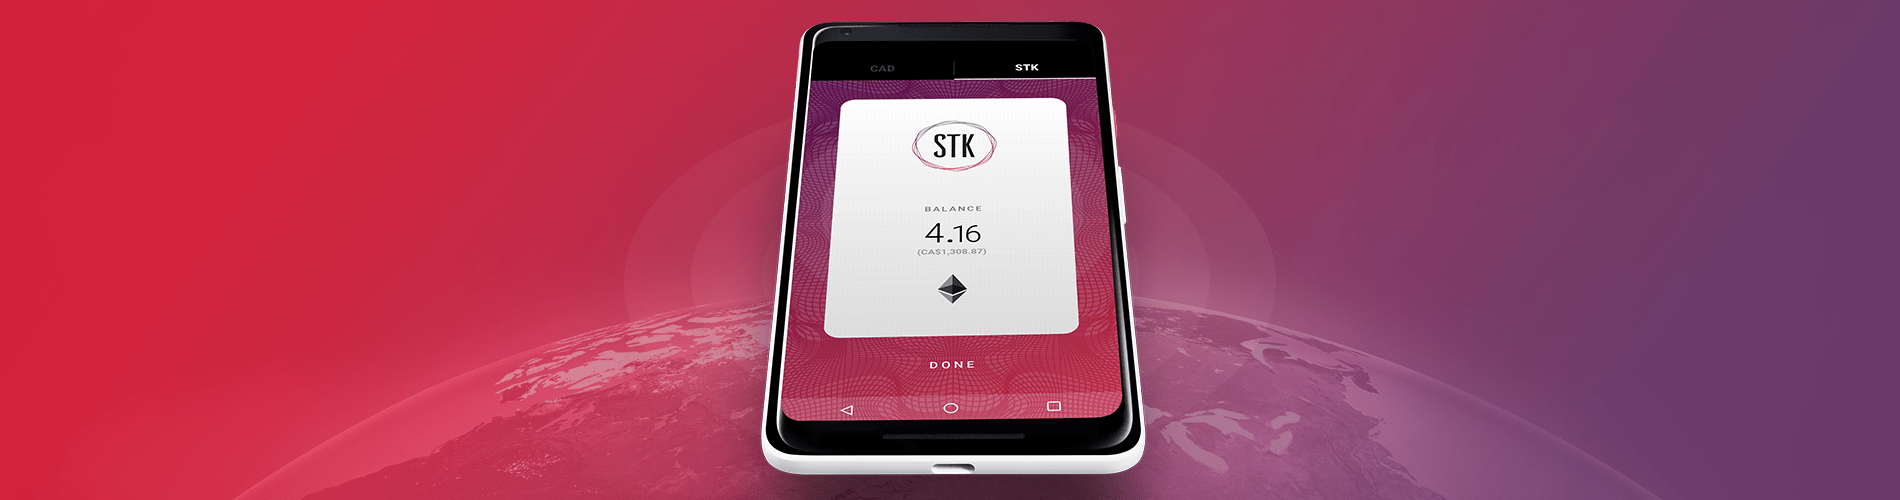 STK Global Payments Launches Pre-sale